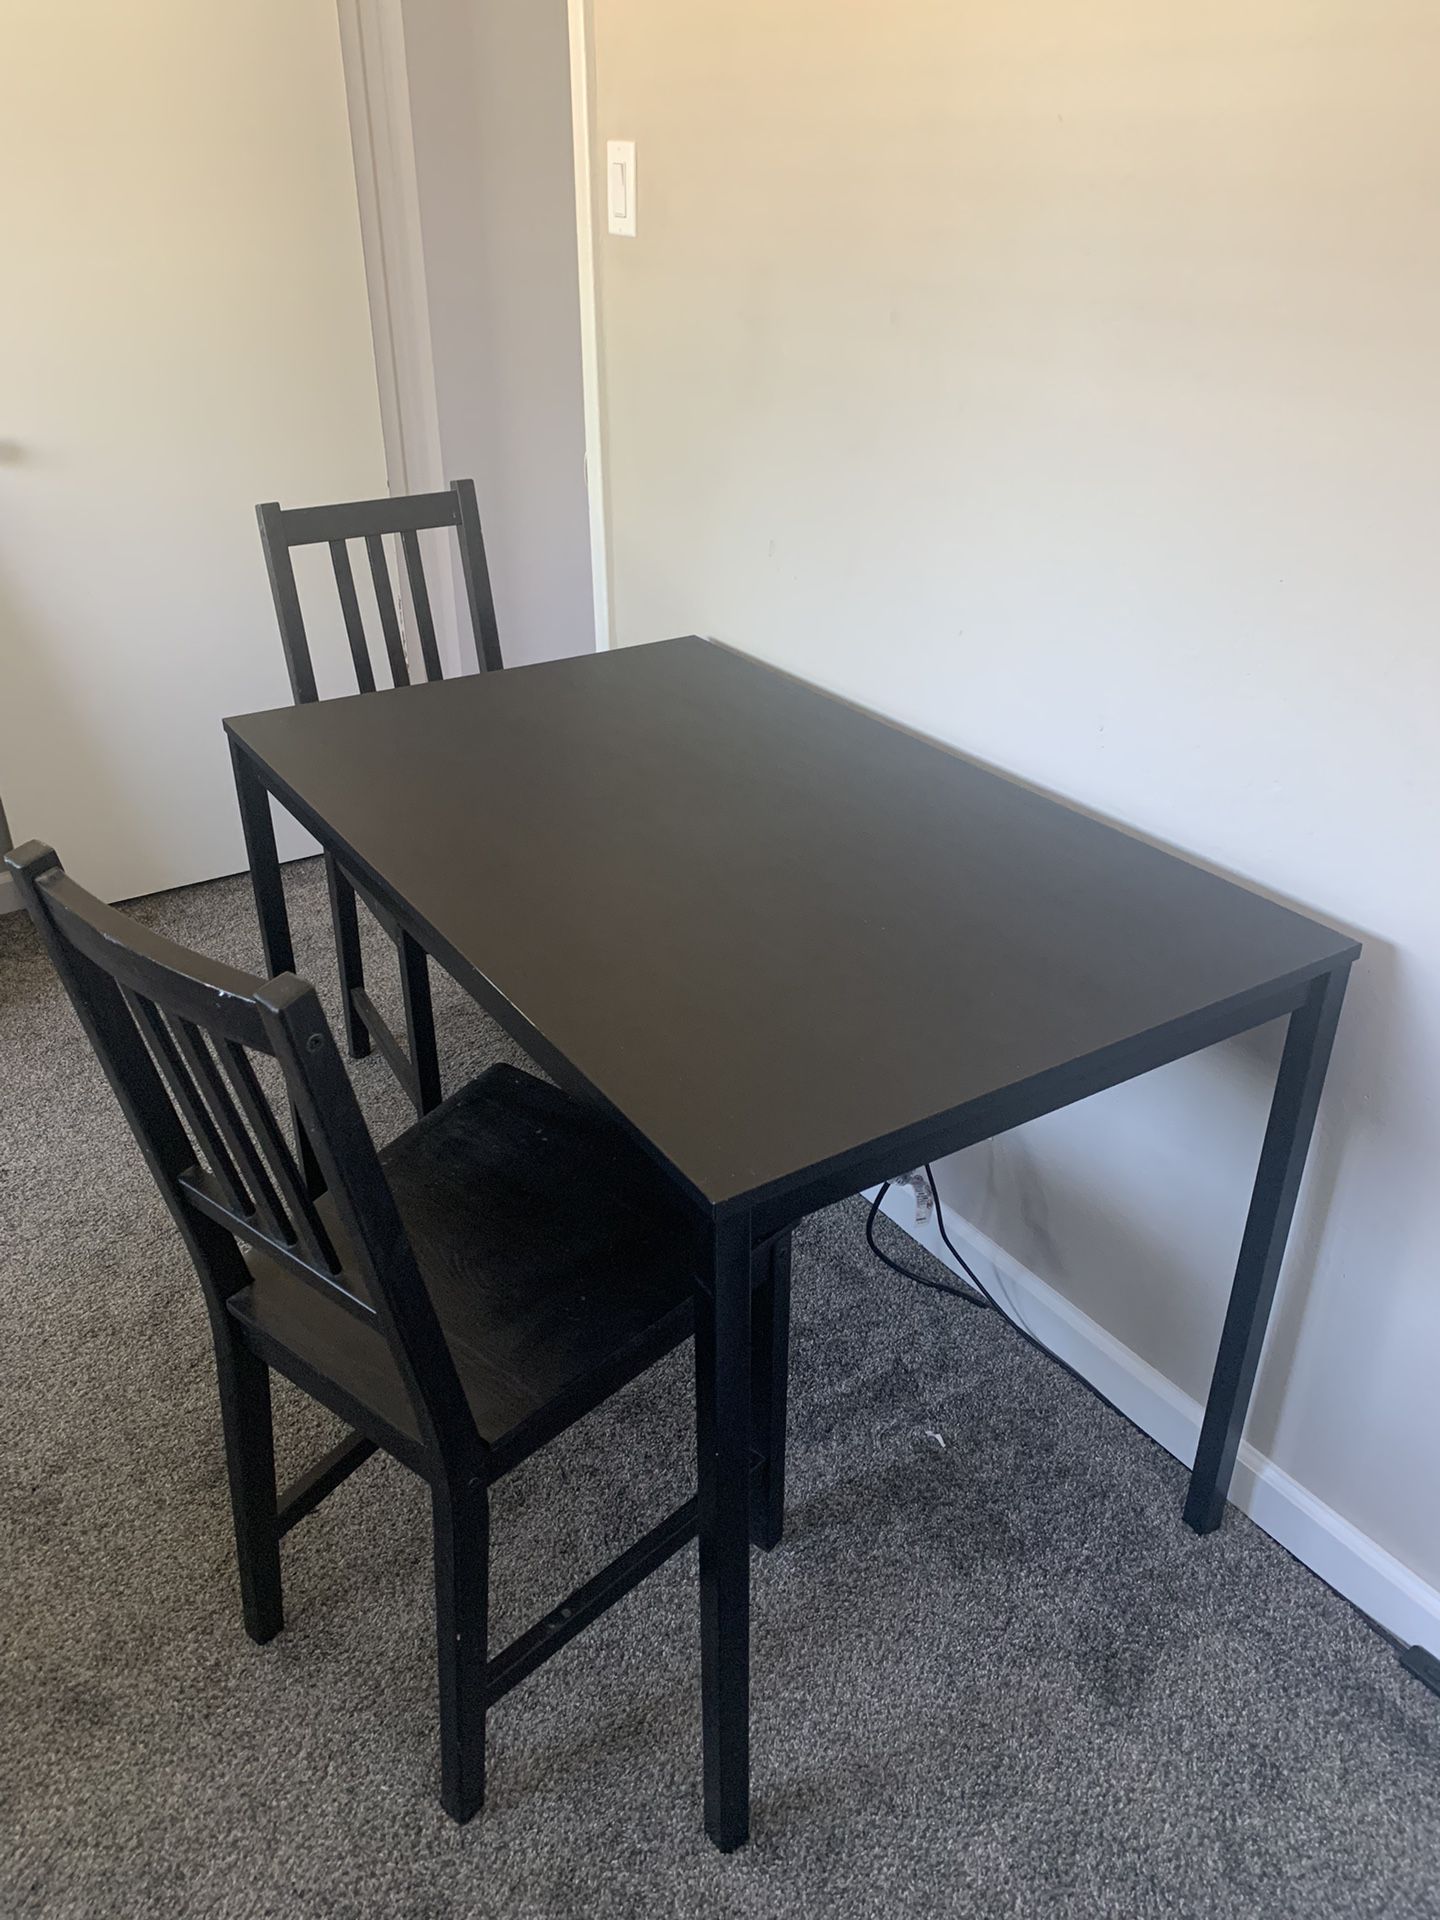 IKEA Table And Chairs For Sale 